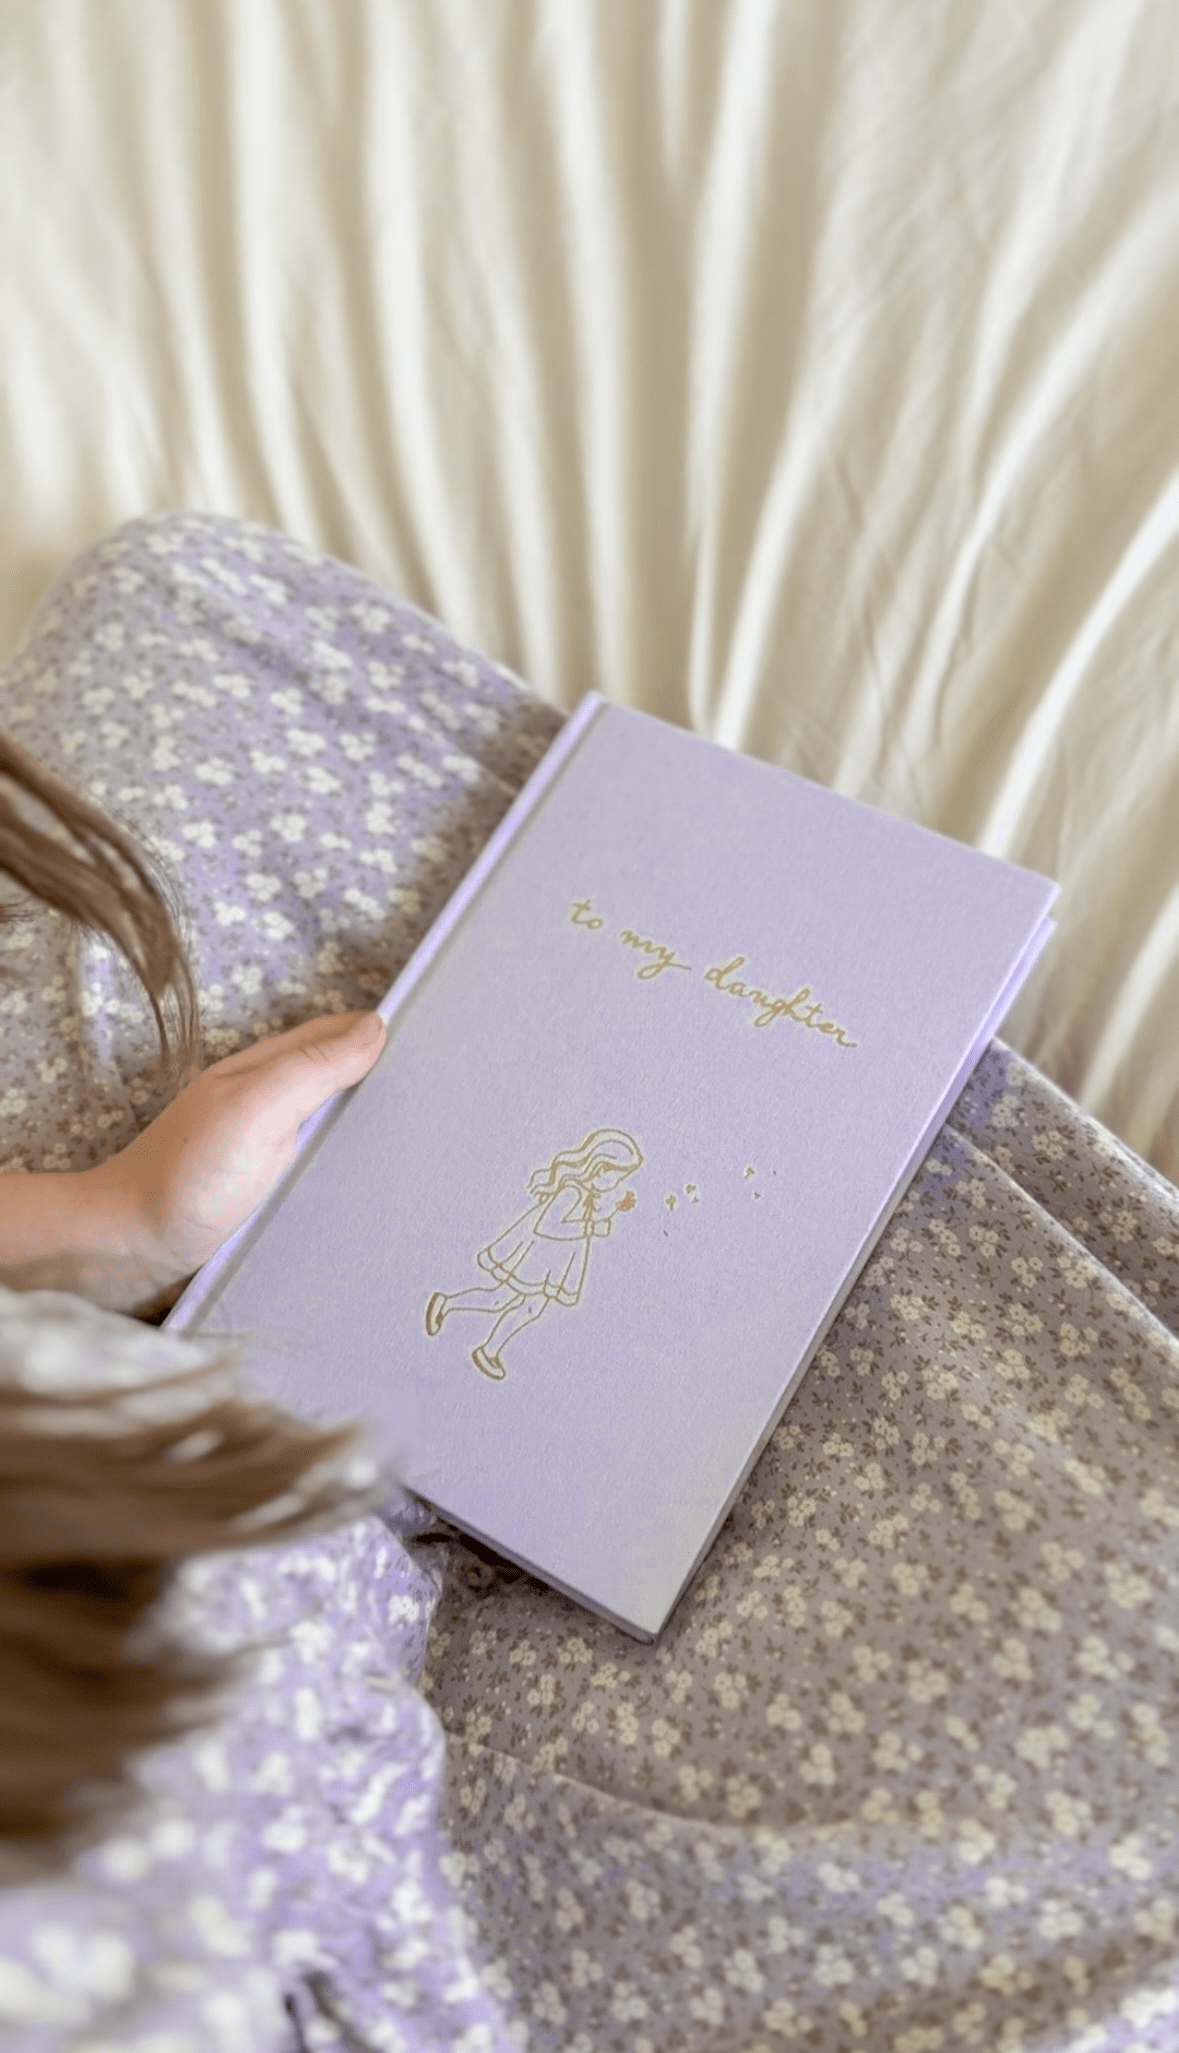 To My Daughter - Childhood Journal & Baby Book Journals Forget Me Not 